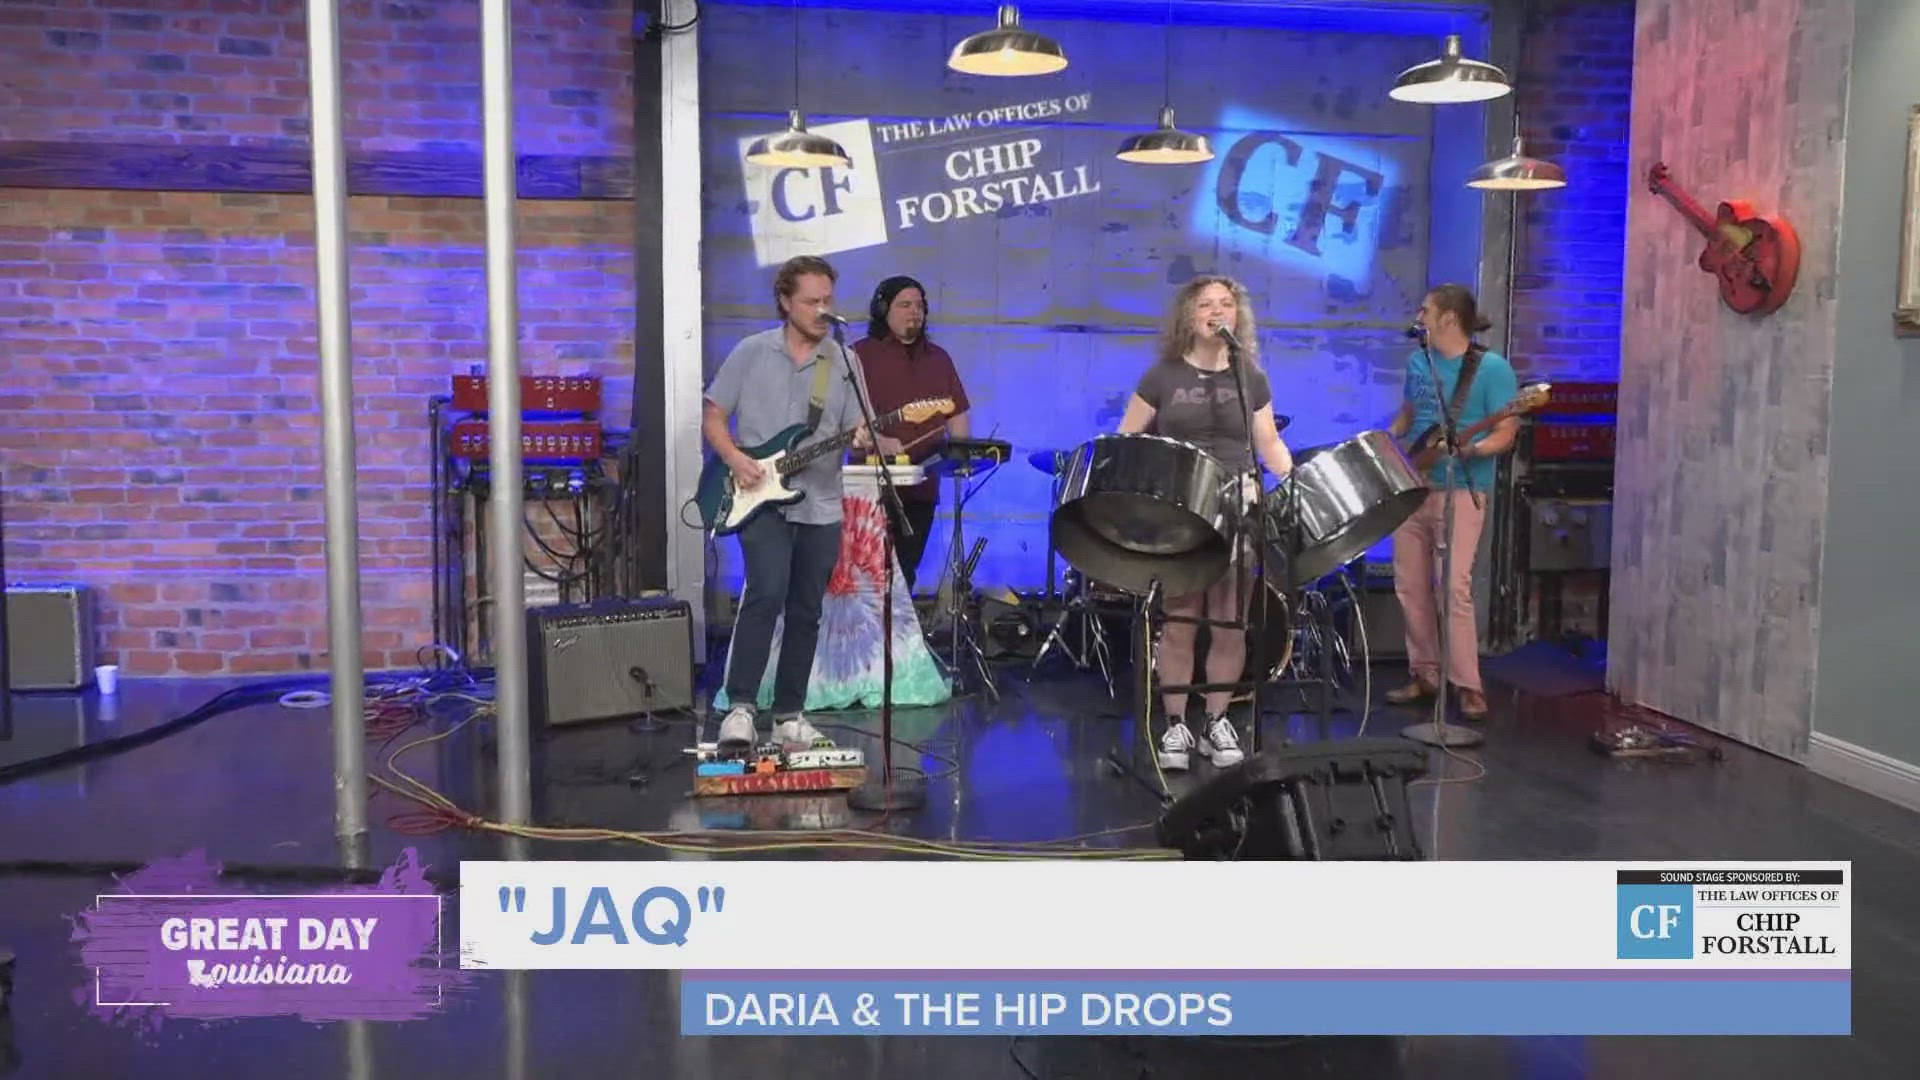 Meet Daria & The Hip Drops and enjoy another song from the band!